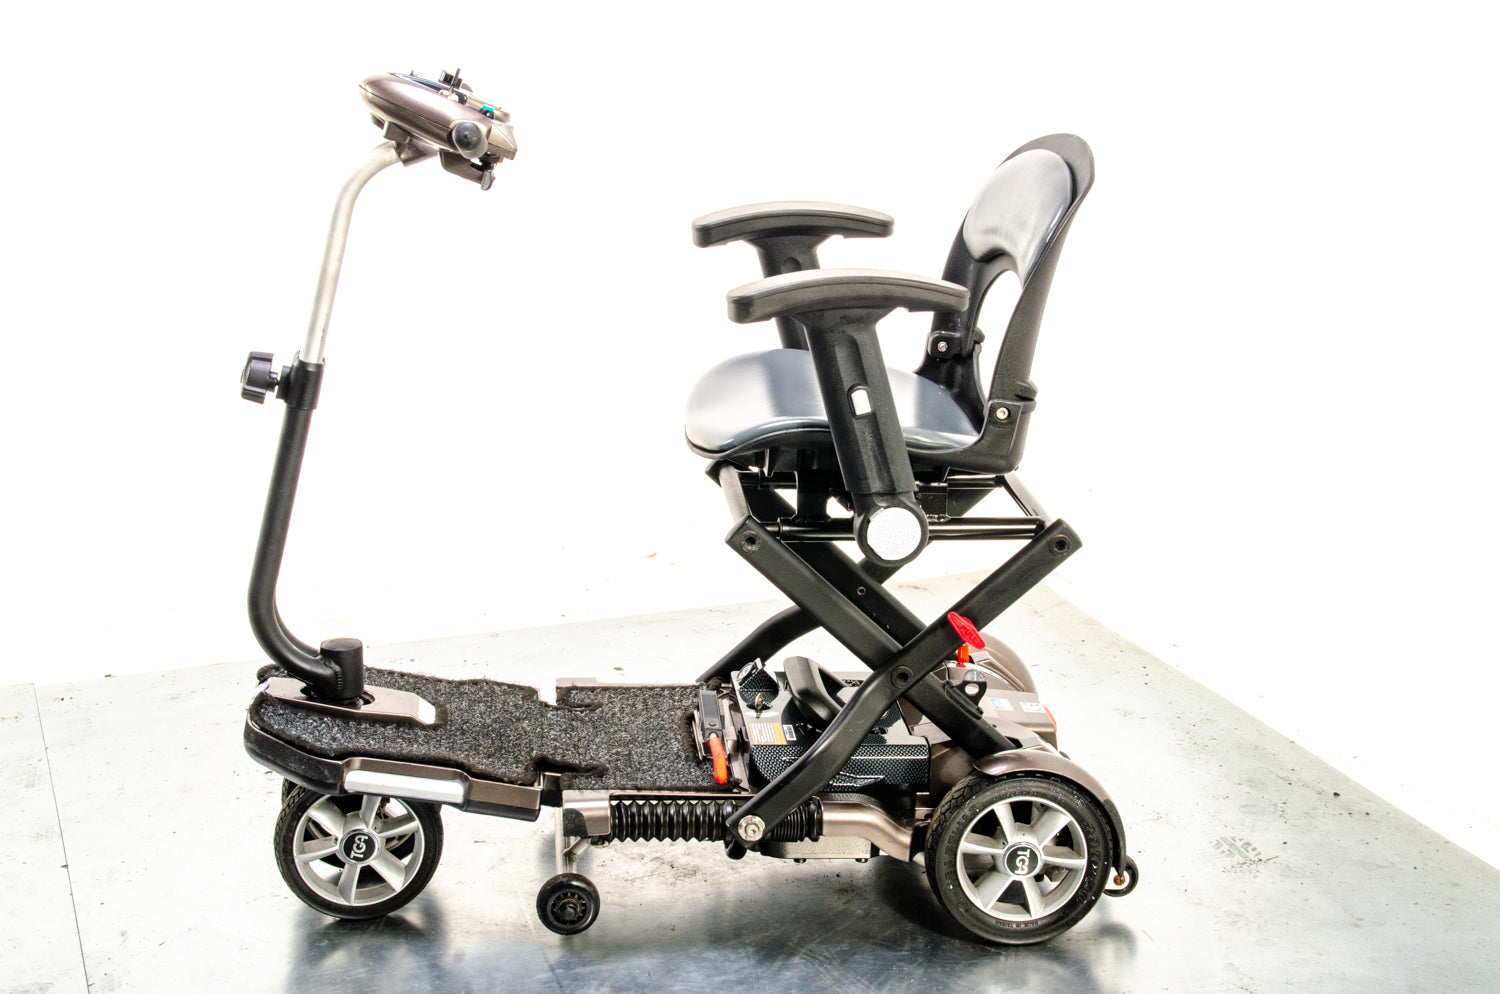 TGA Minimo Used Mobility Scooter Small Compact Folding Travel Lithium Battery Lightweight 13442